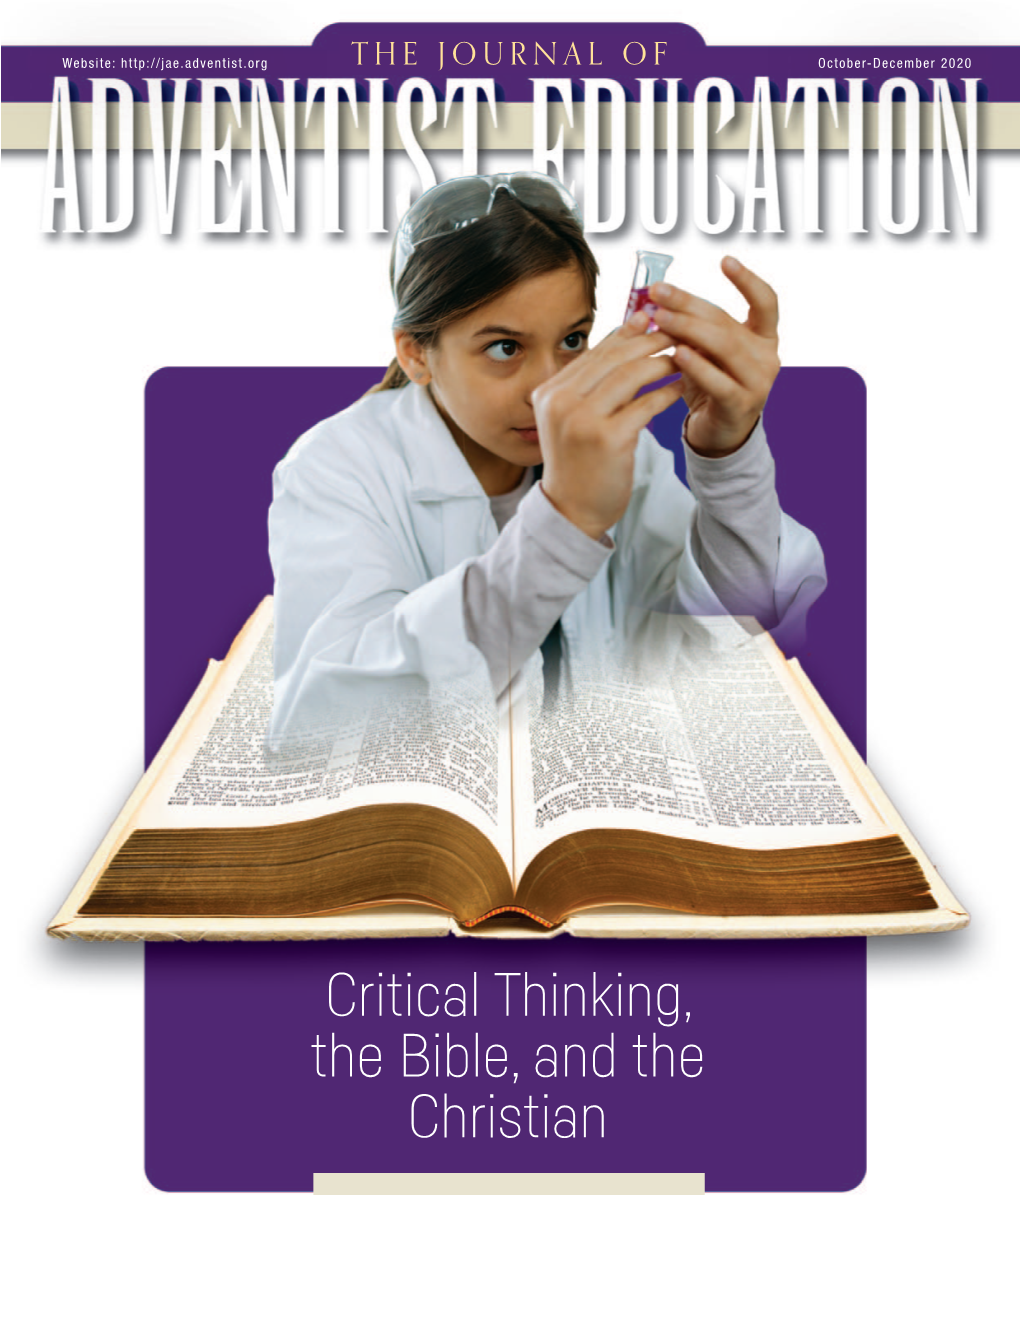 Critical Thinking, the Bible, and the Christian the Journal of CONTENTS ADVENTIST EDUCATION